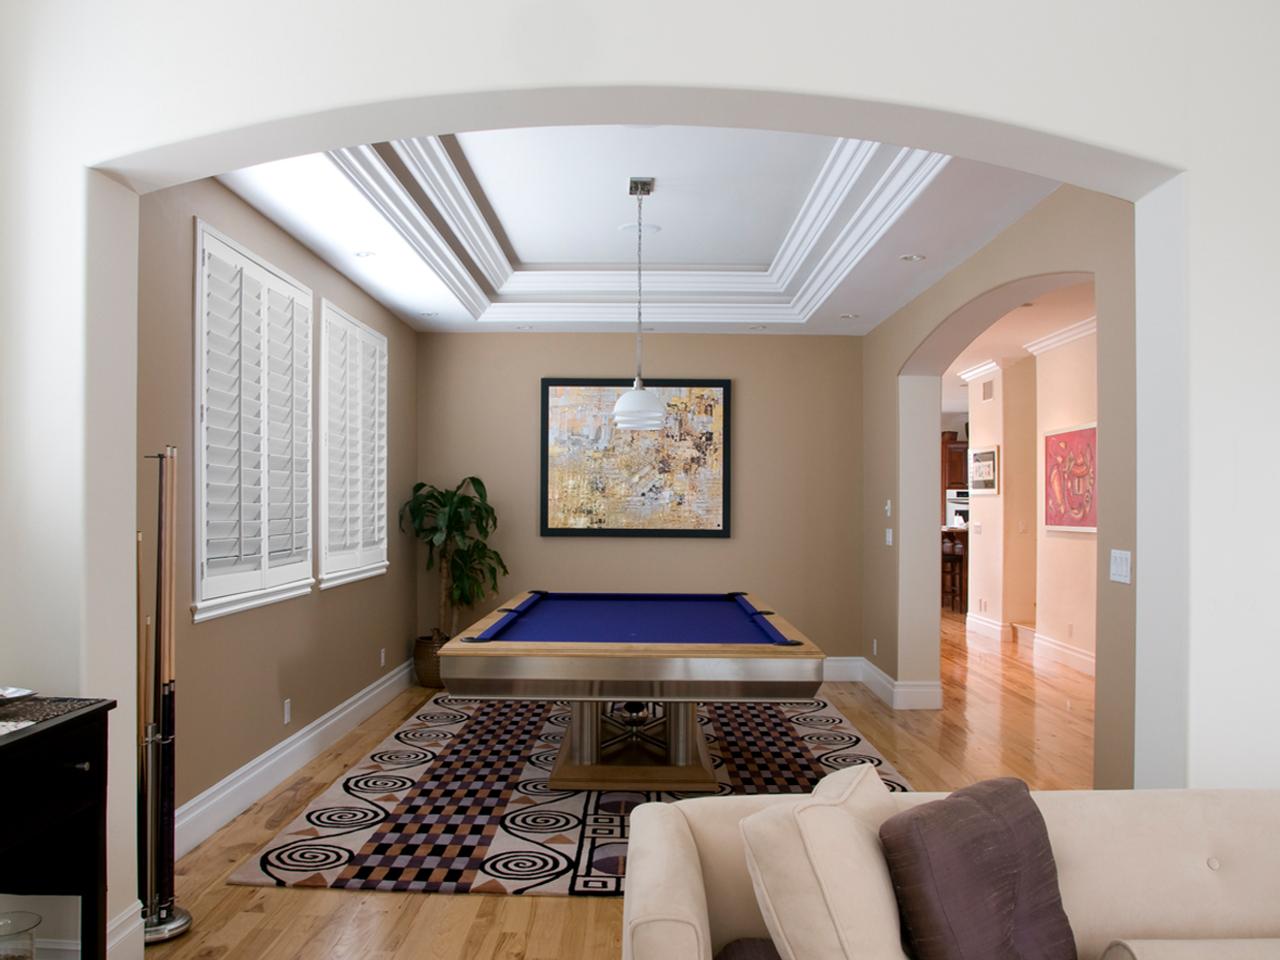 Interior shutters in a rec room with pool table